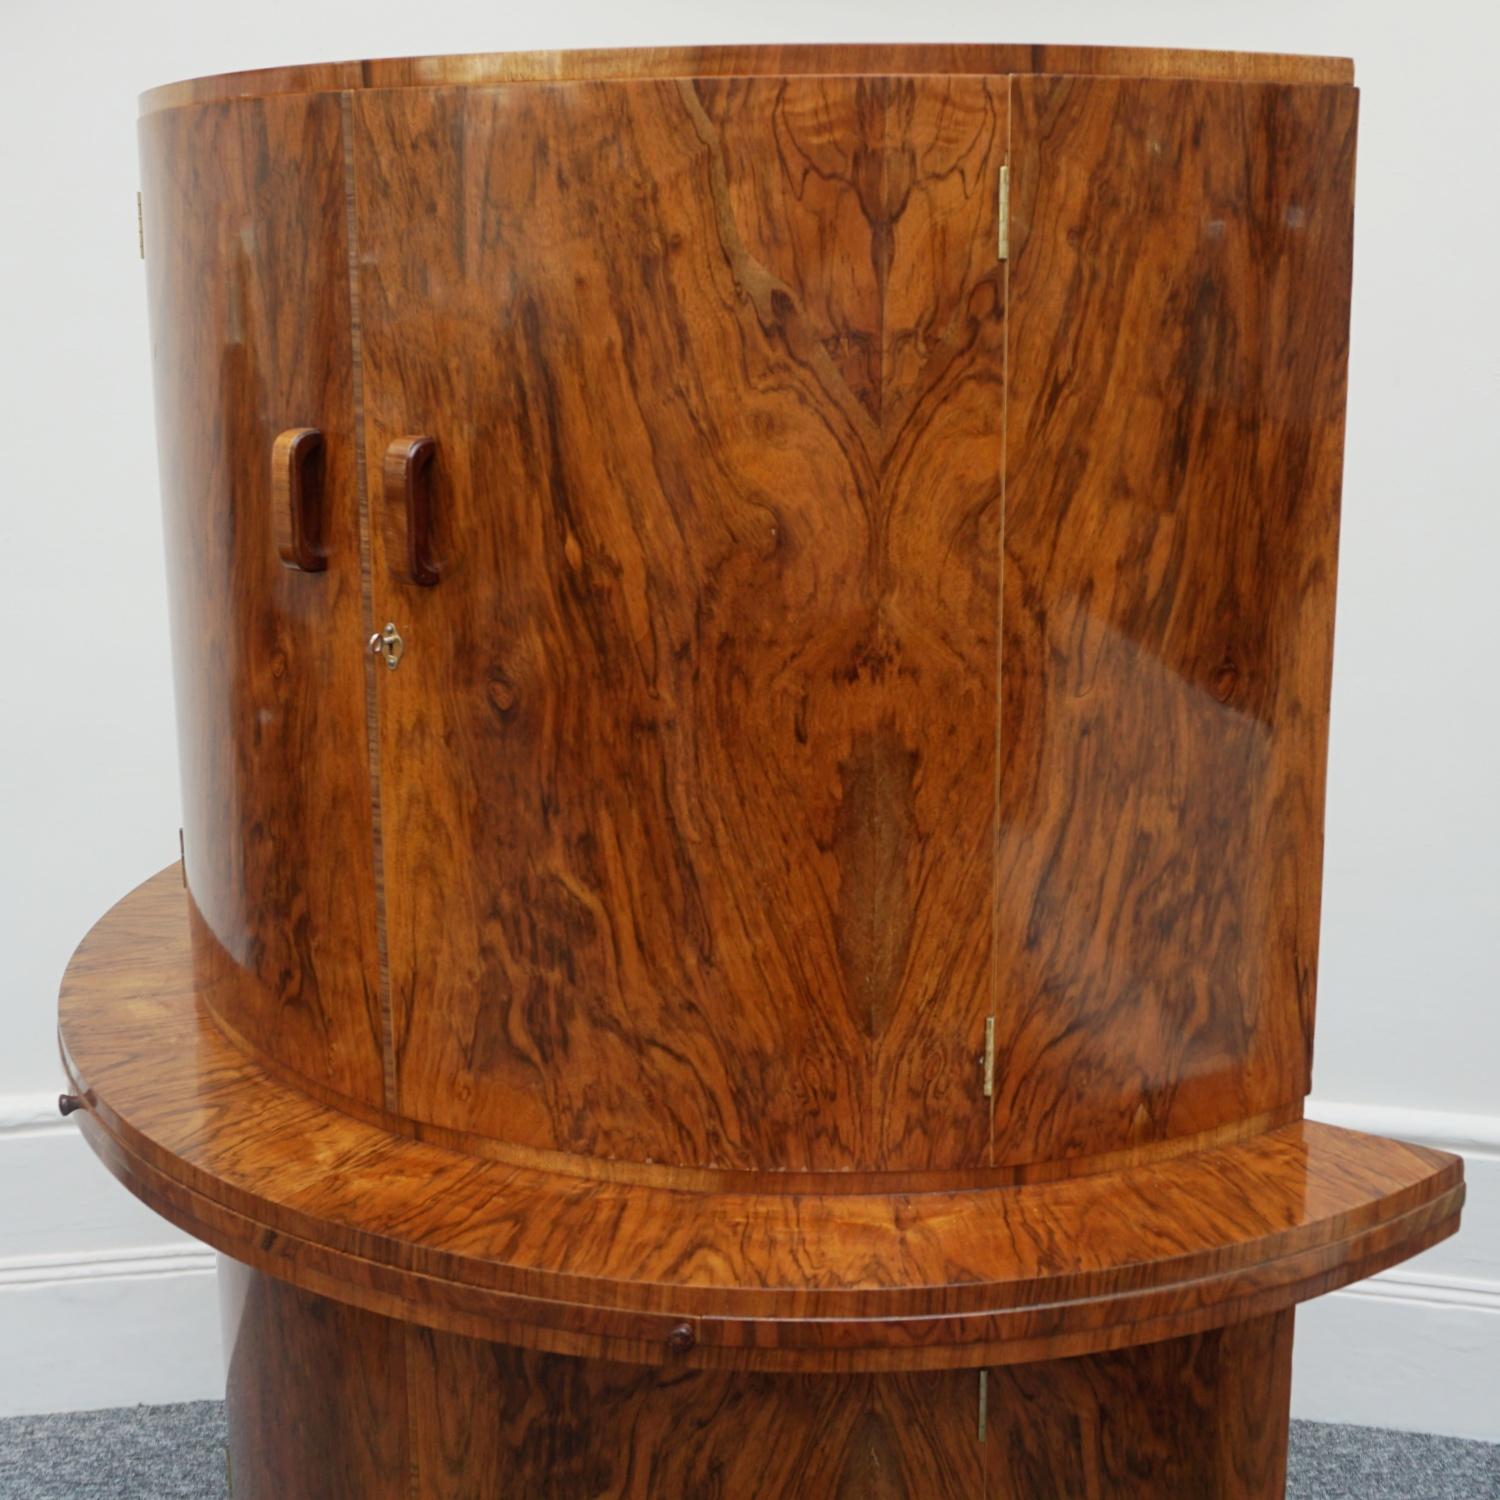 An Art Deco cocktail cabinet by Gold Feather Products retailed by Wolfe & Hollander Ltd London. Burr walnut veneered with figured walnut banding and top. Mirrored shelved interior to top, with a shelved, lower cabinet with bottle